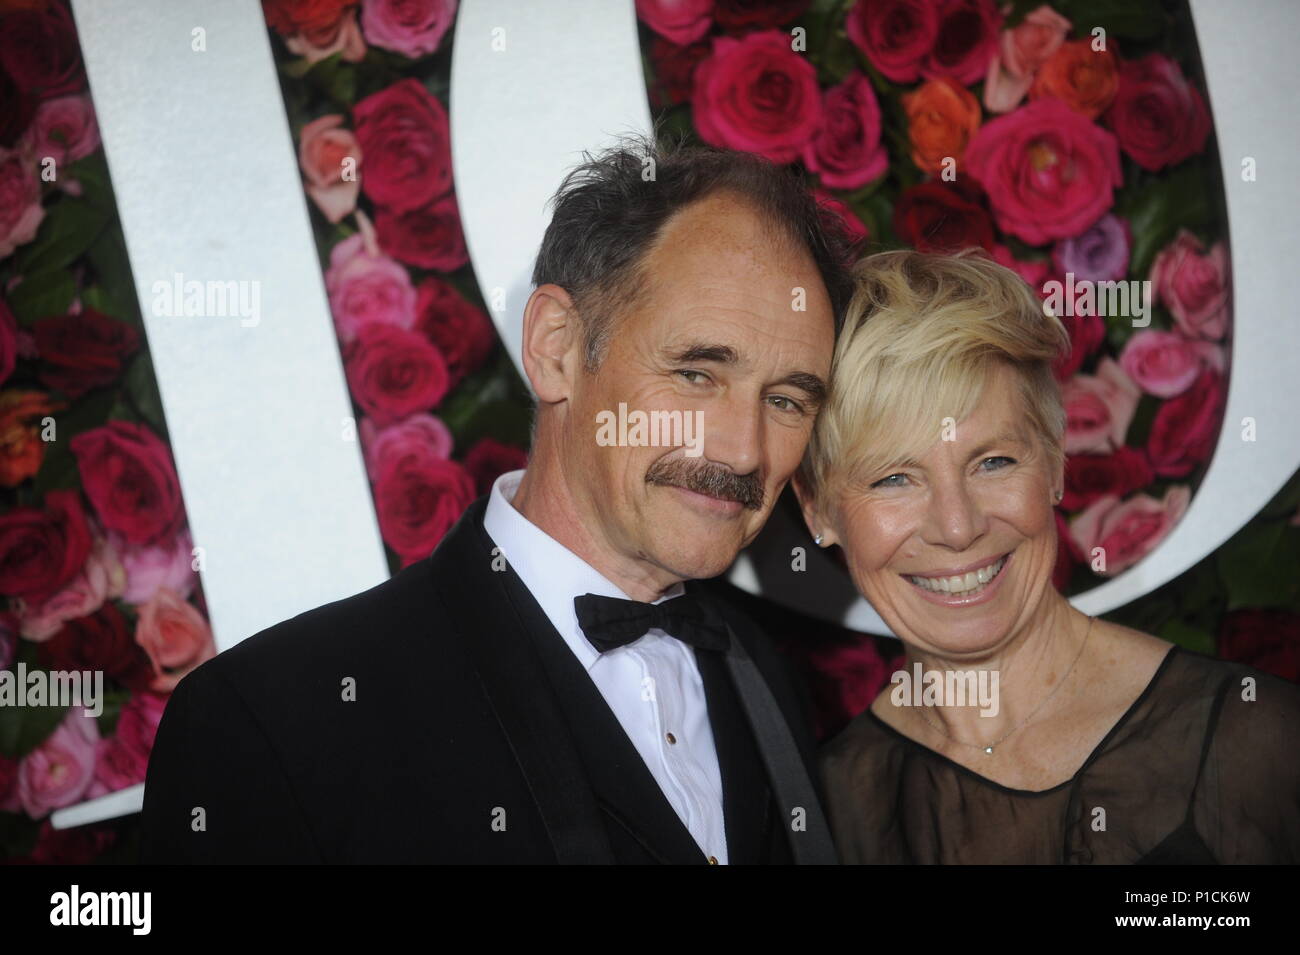 NEW YORK, NY - JUNE 10: Mark Rylance, Claire van Kampen attends the 72nd Annual Tony Awards on June 10, 2018 at Radio City Music Hall in New York City.    People:  Mark Rylance, Claire van Kampen Stock Photo